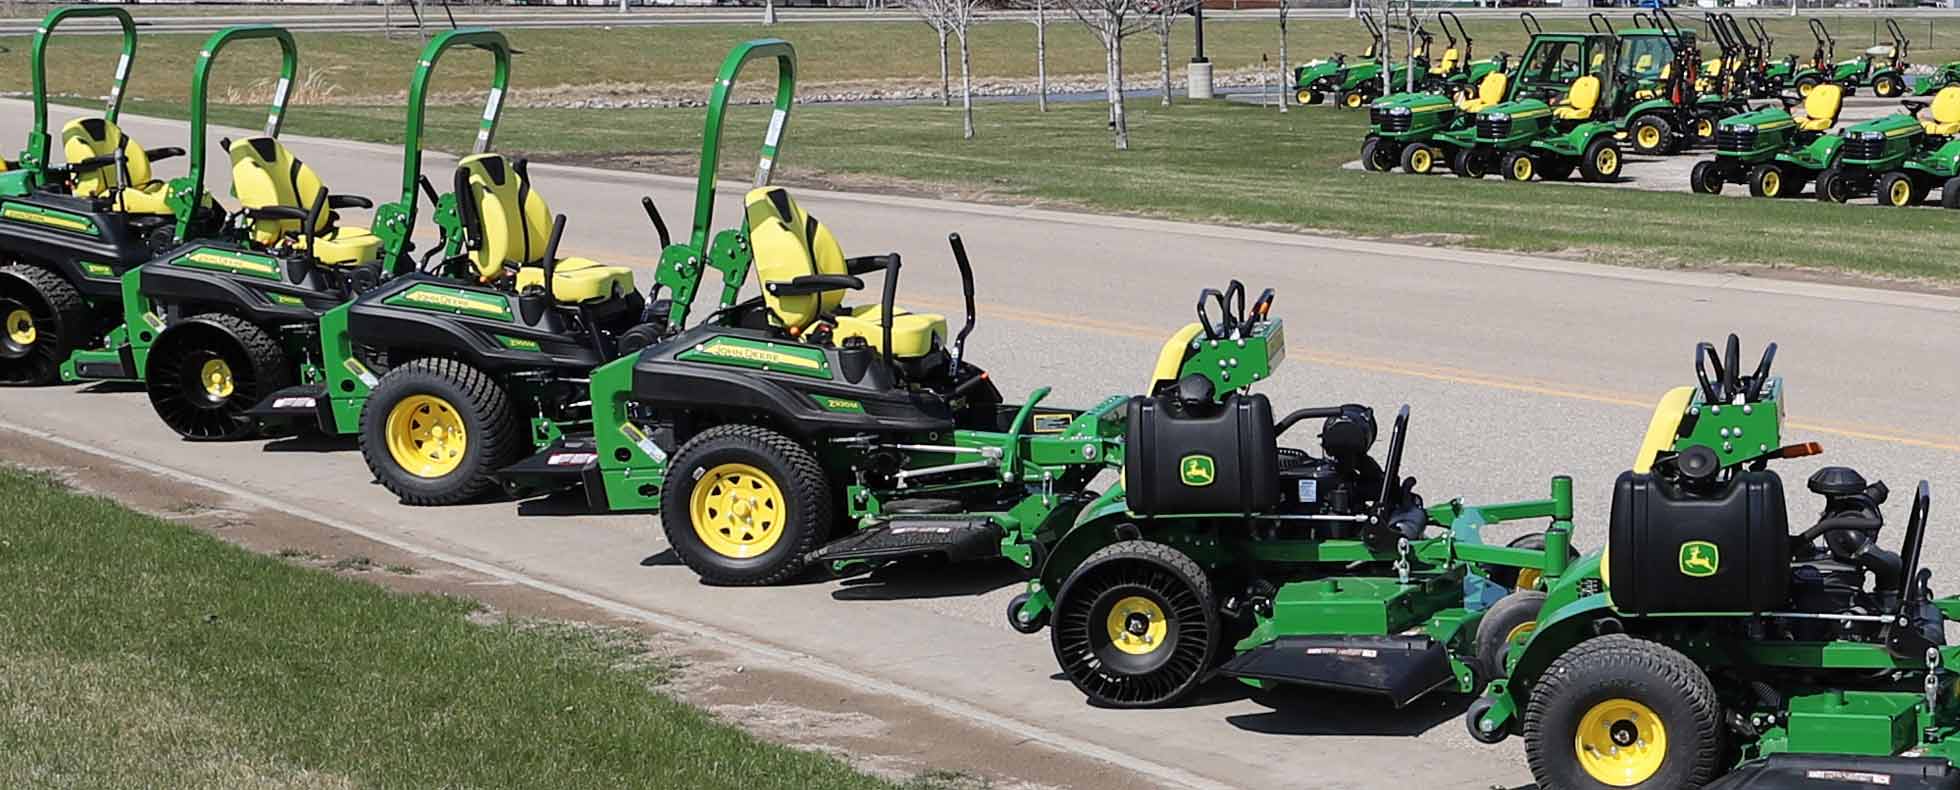 6 Crucial Factors to Help Decide Which to Choose: Stand-On or Sit-Down Lawn Mower